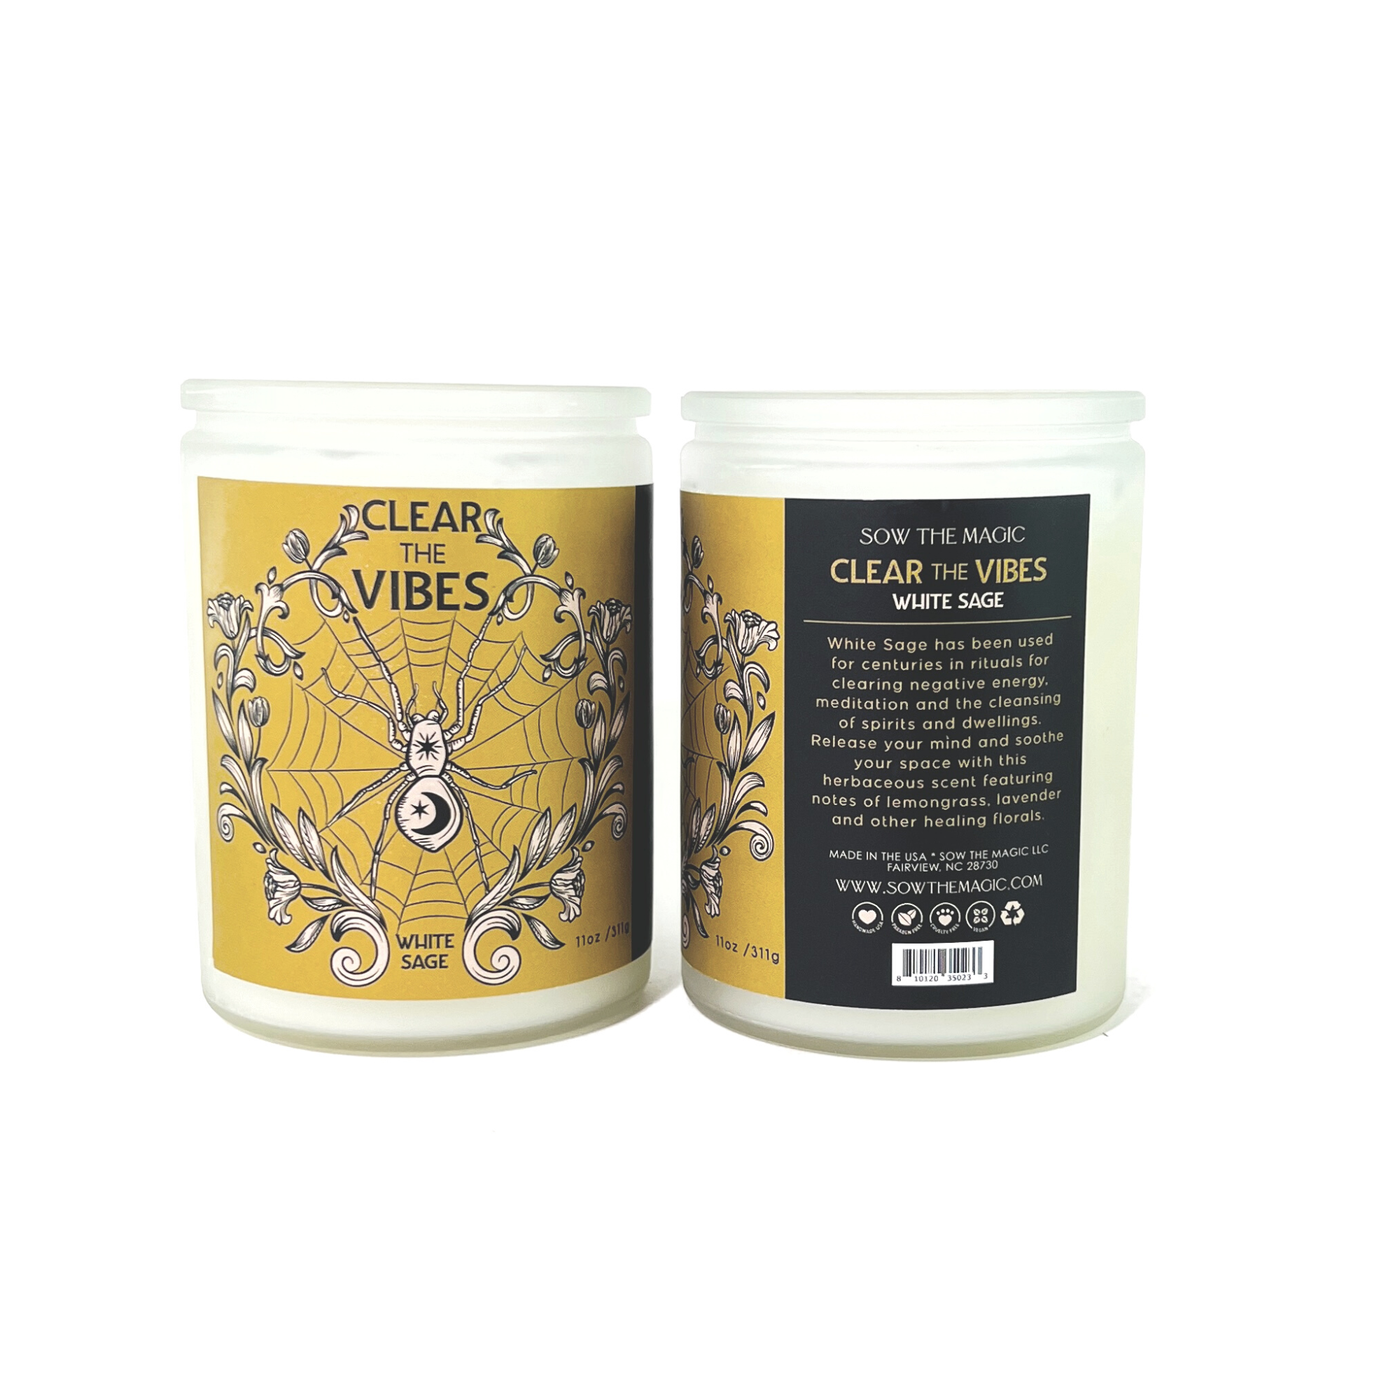 Clear the Vibes Garden Energy Clearing Candle in White Sage